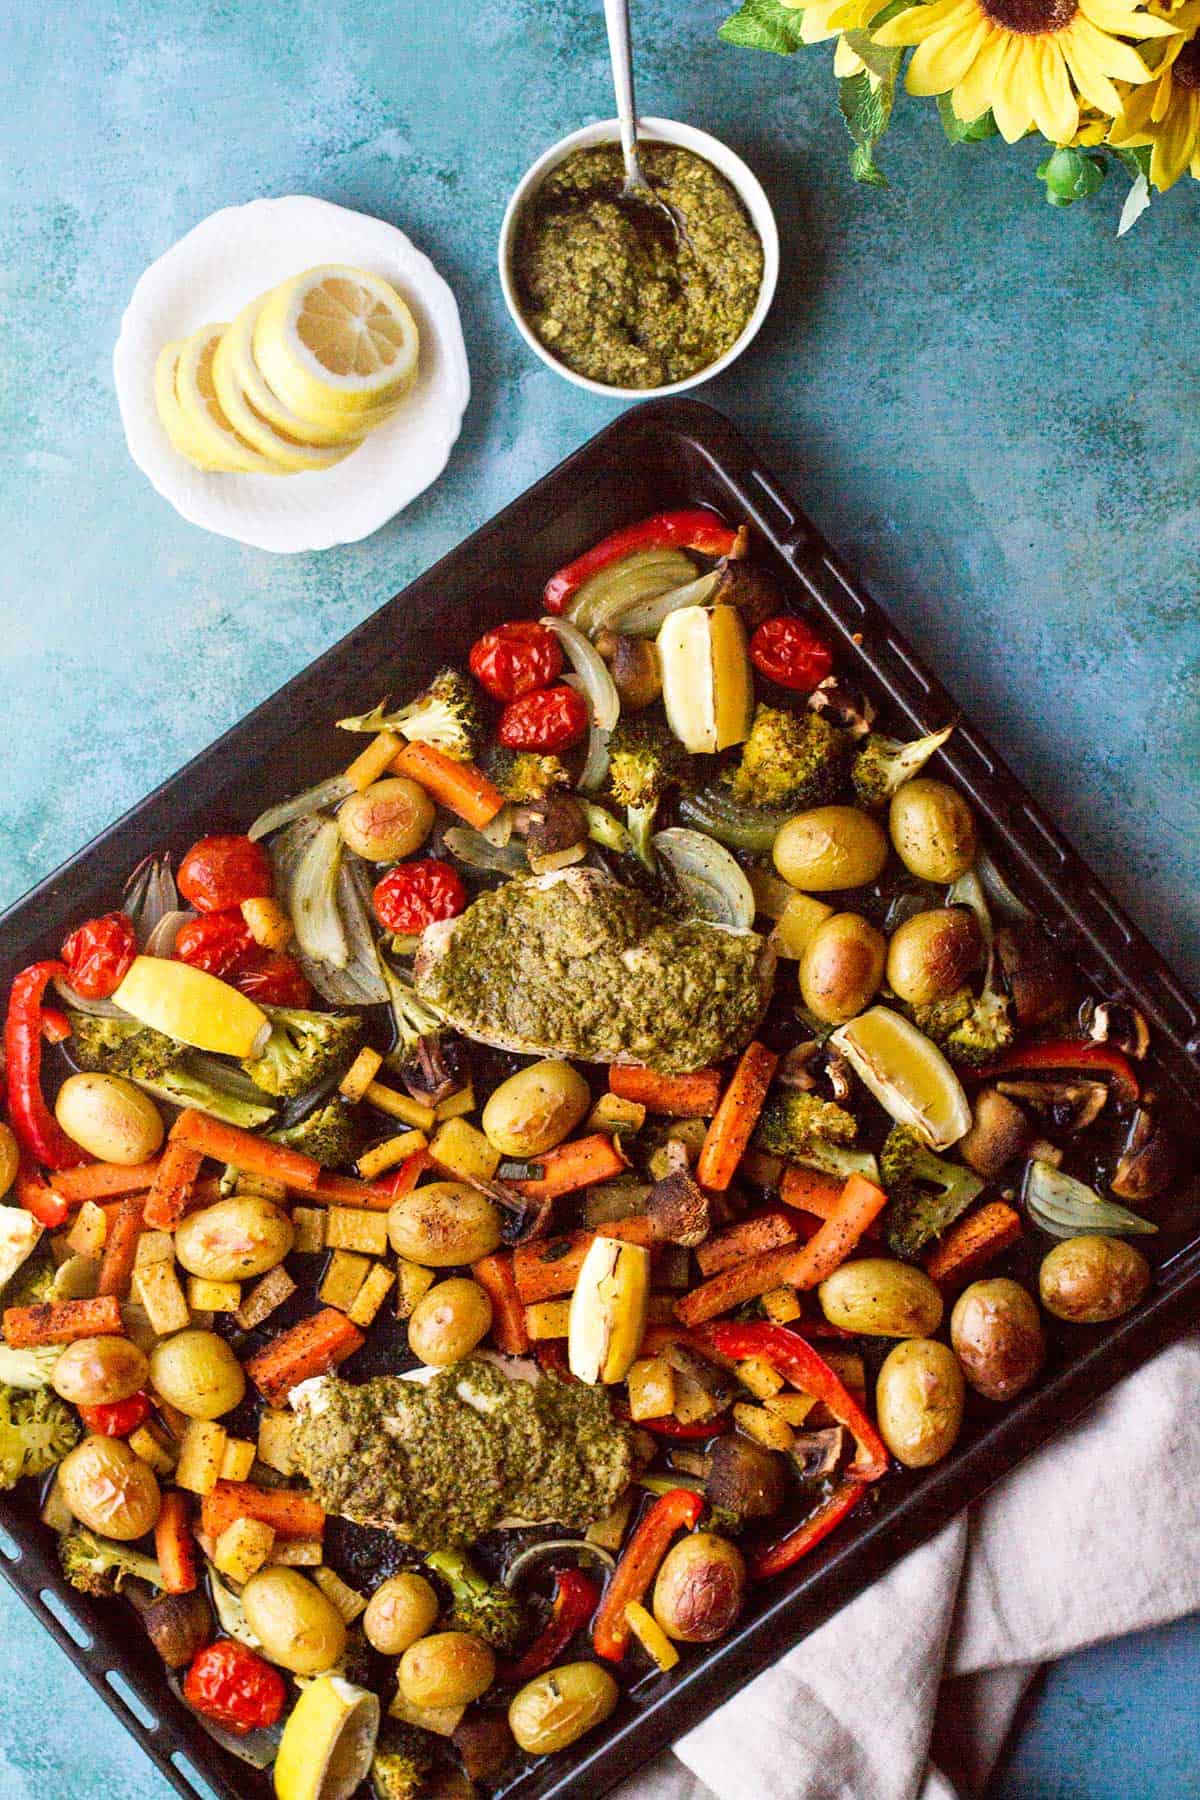 Baked pesto chicken and potatoes baking sheet, seen from above.